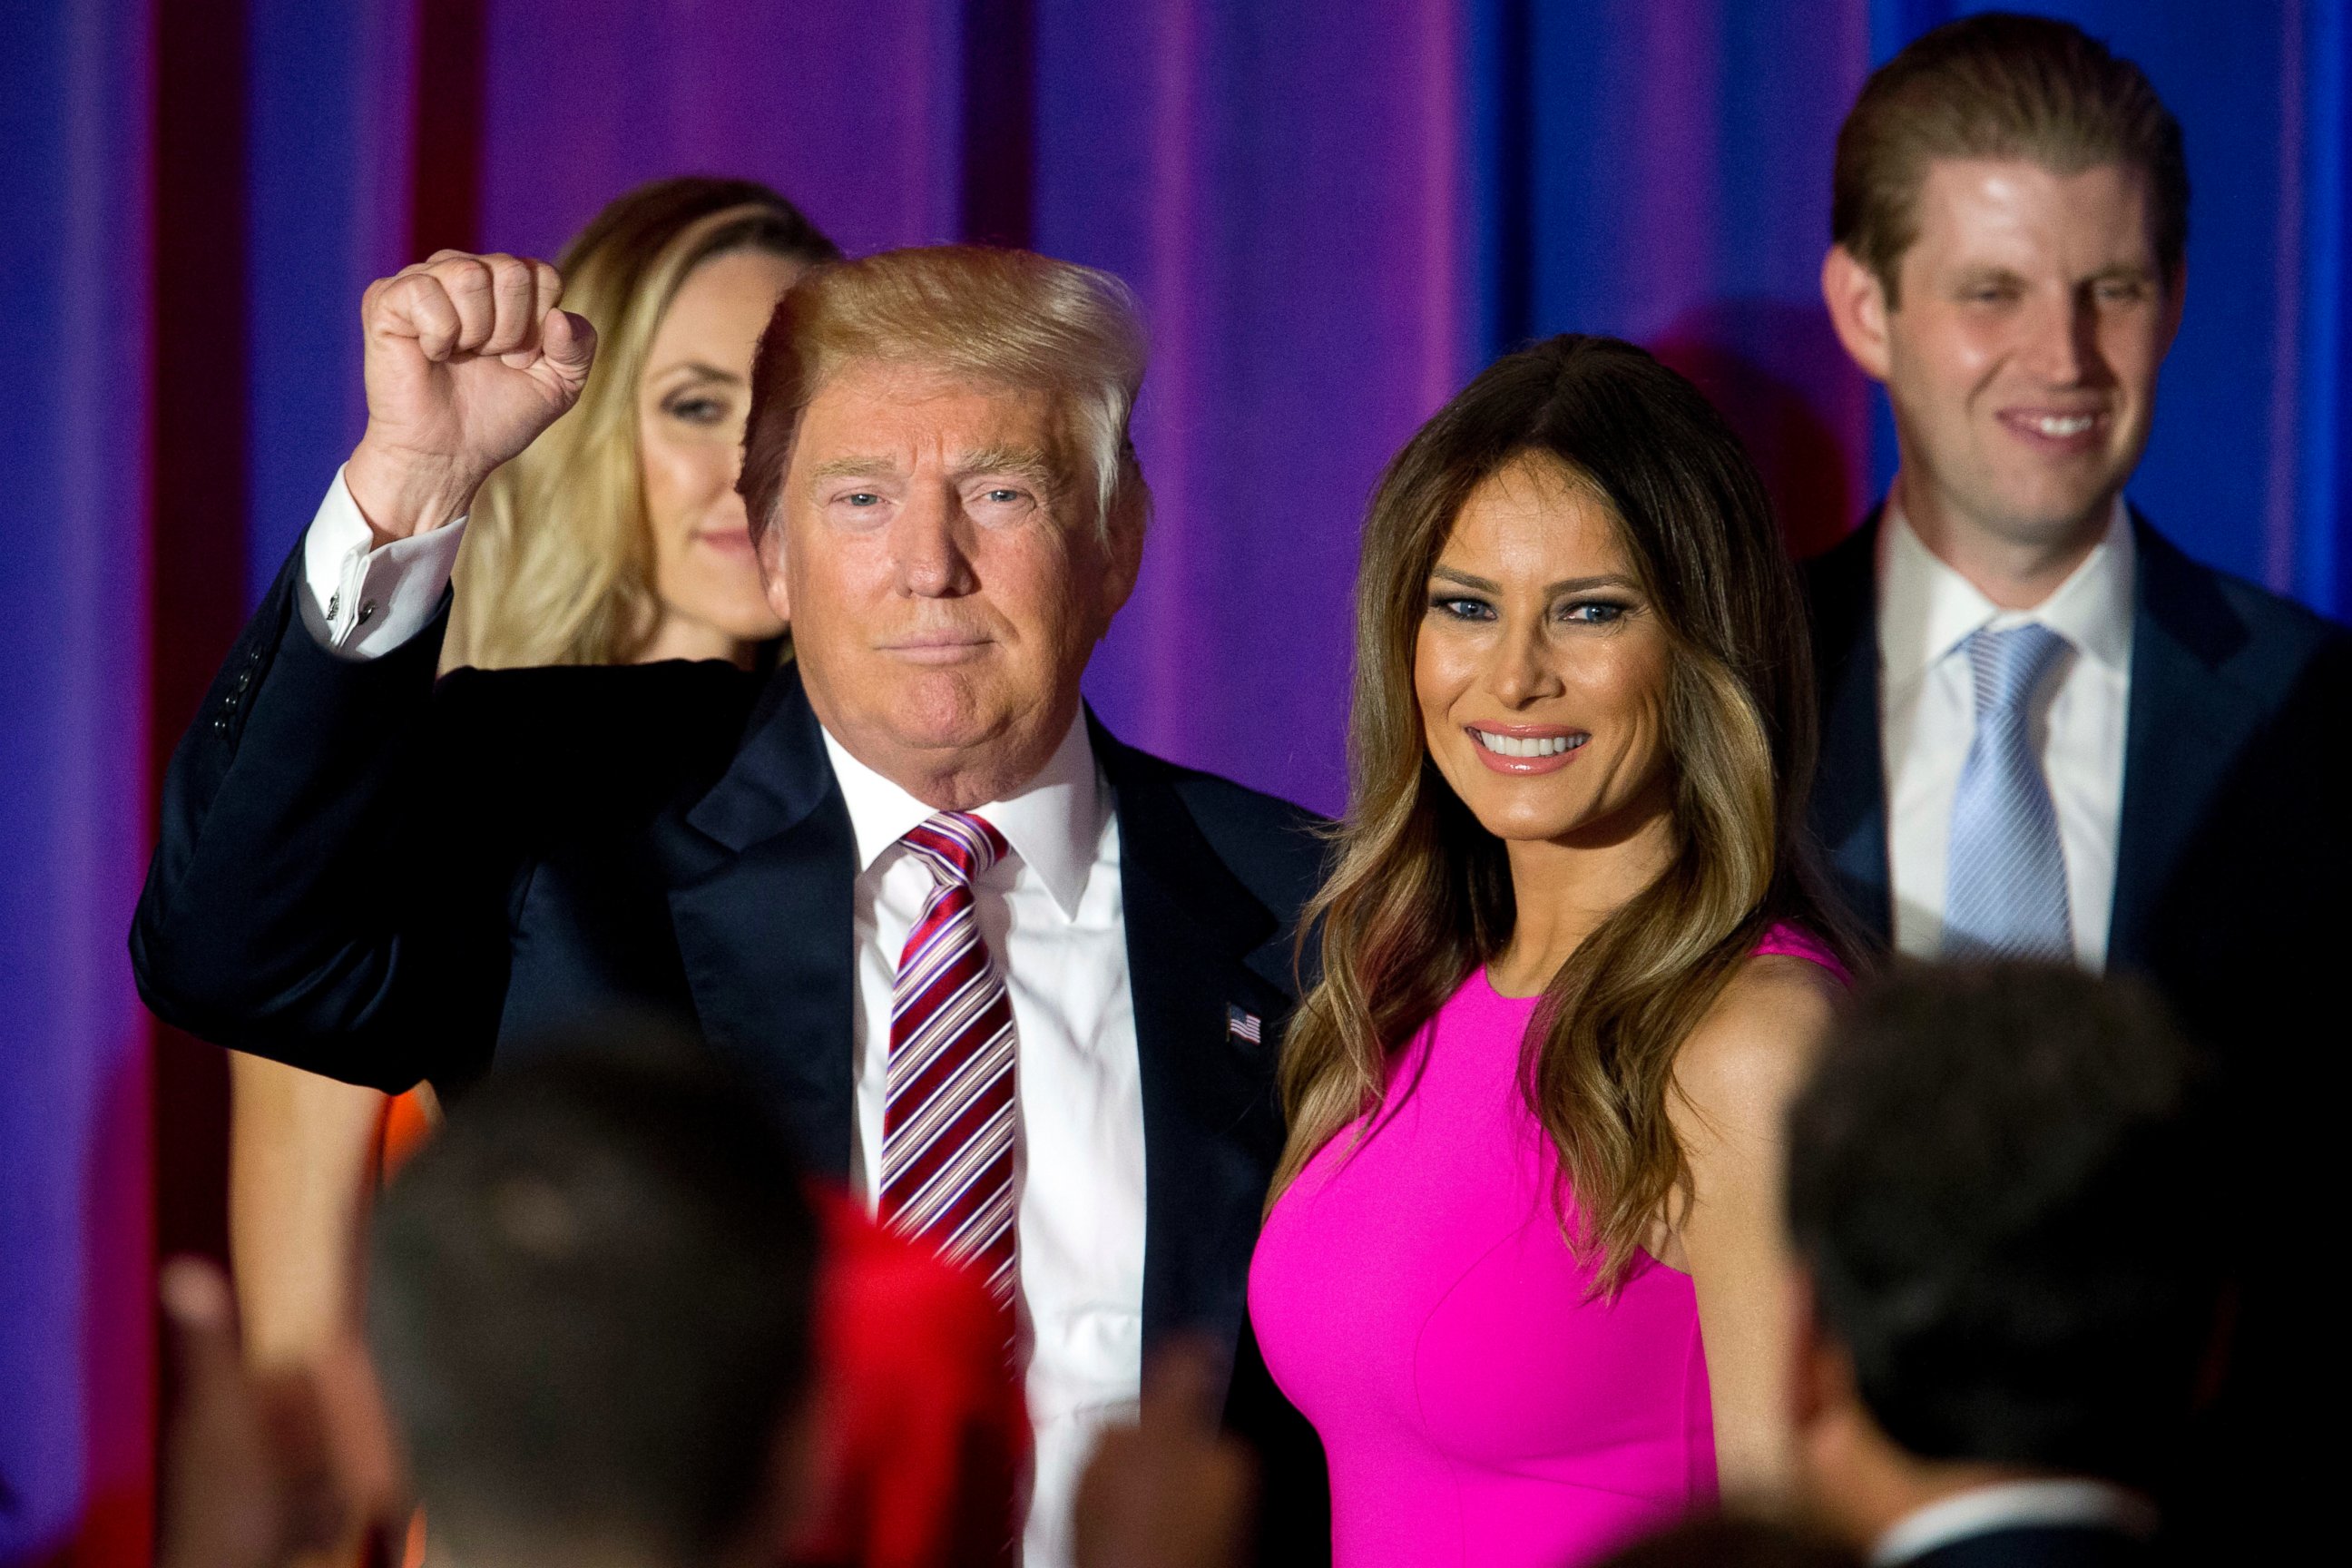 PHOTO: Republican presidential candidate Donald Trump gestures to supporters as he leaves the stage with his wife Melania after a news conference at the Trump National Golf Club Westchester, June 7, 2016, in Briarcliff Manor, New York. 